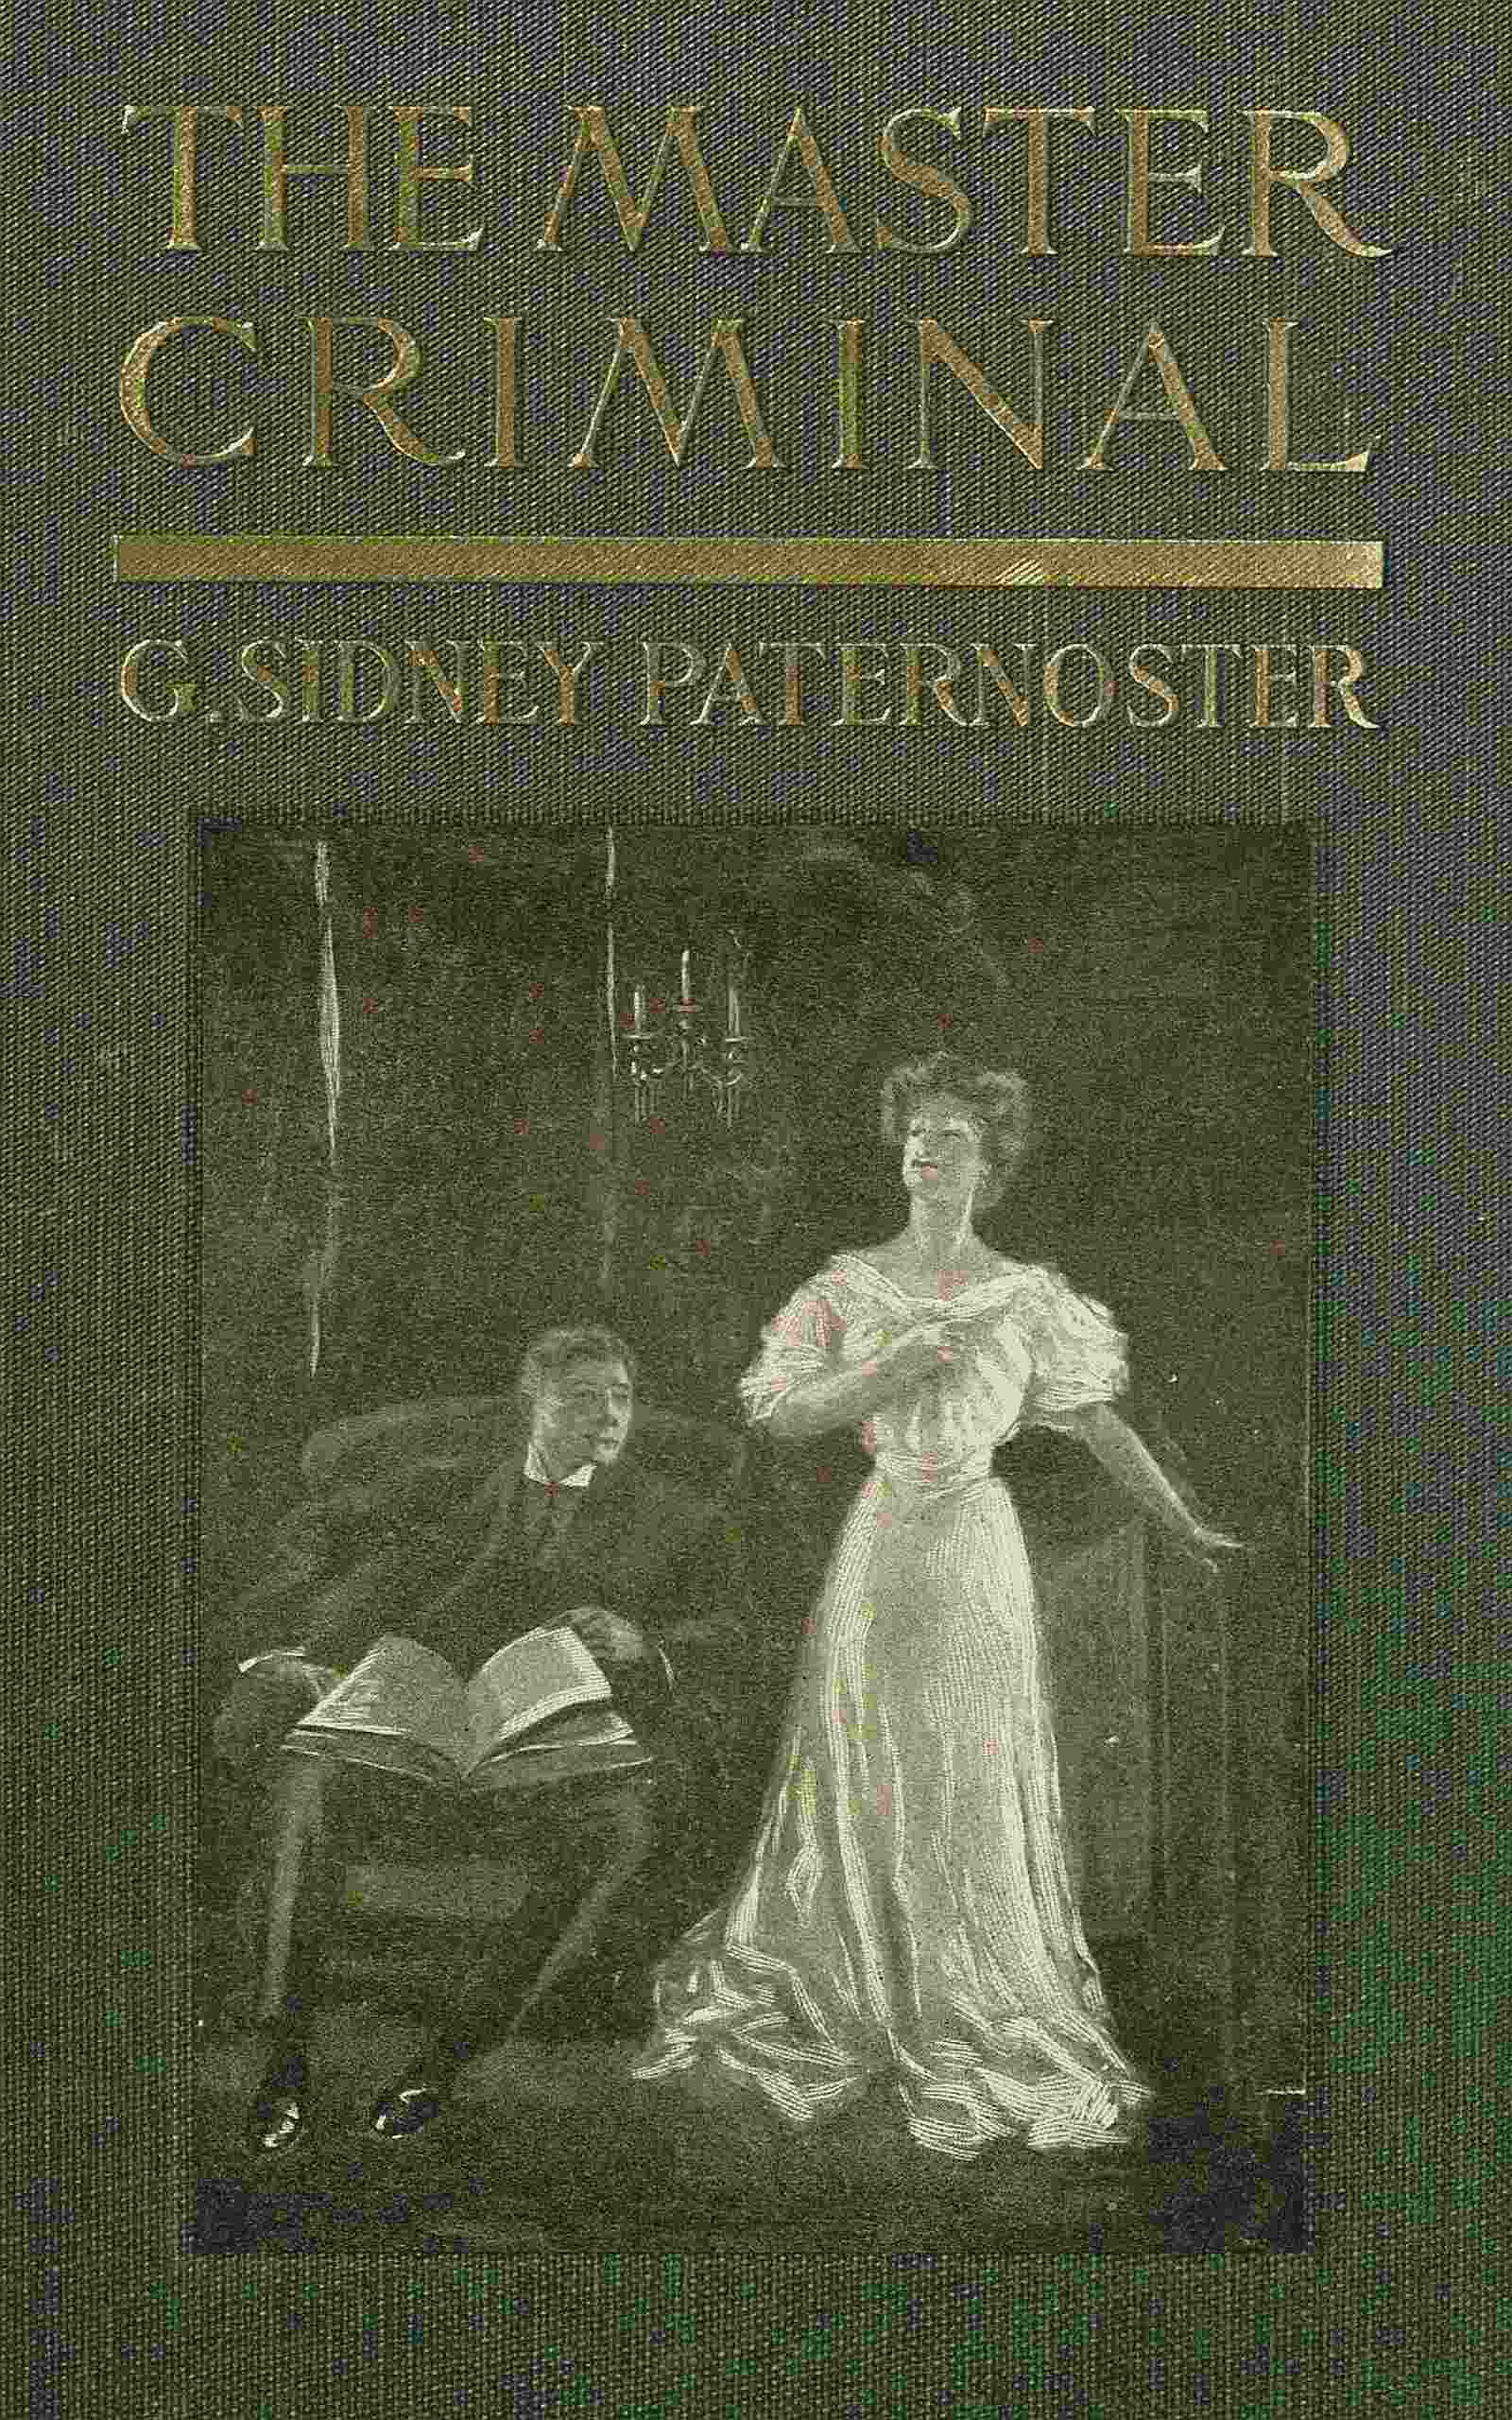 The Project Gutenberg eBook of A Thousand Ways to Please a Husband